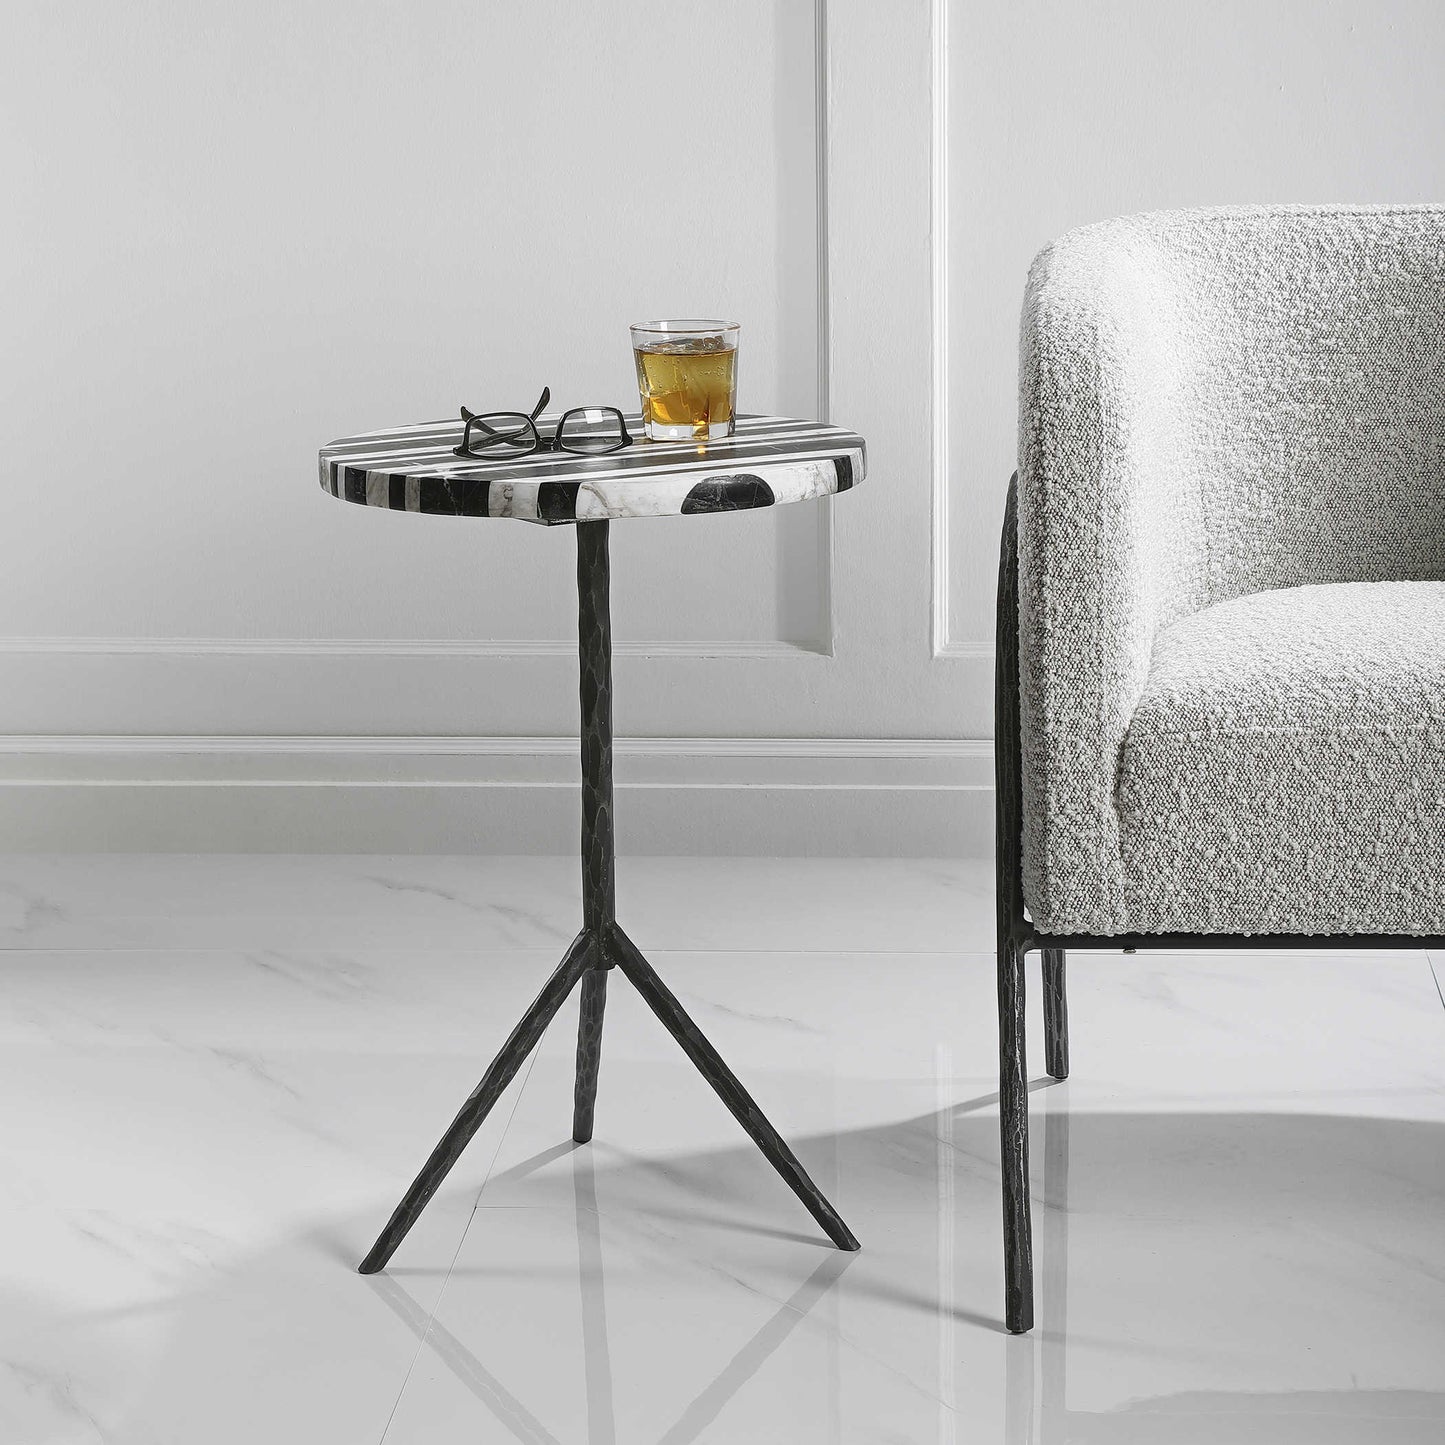 Zebra marble top with scotch on top and glasses next to a classic modern armchair. 